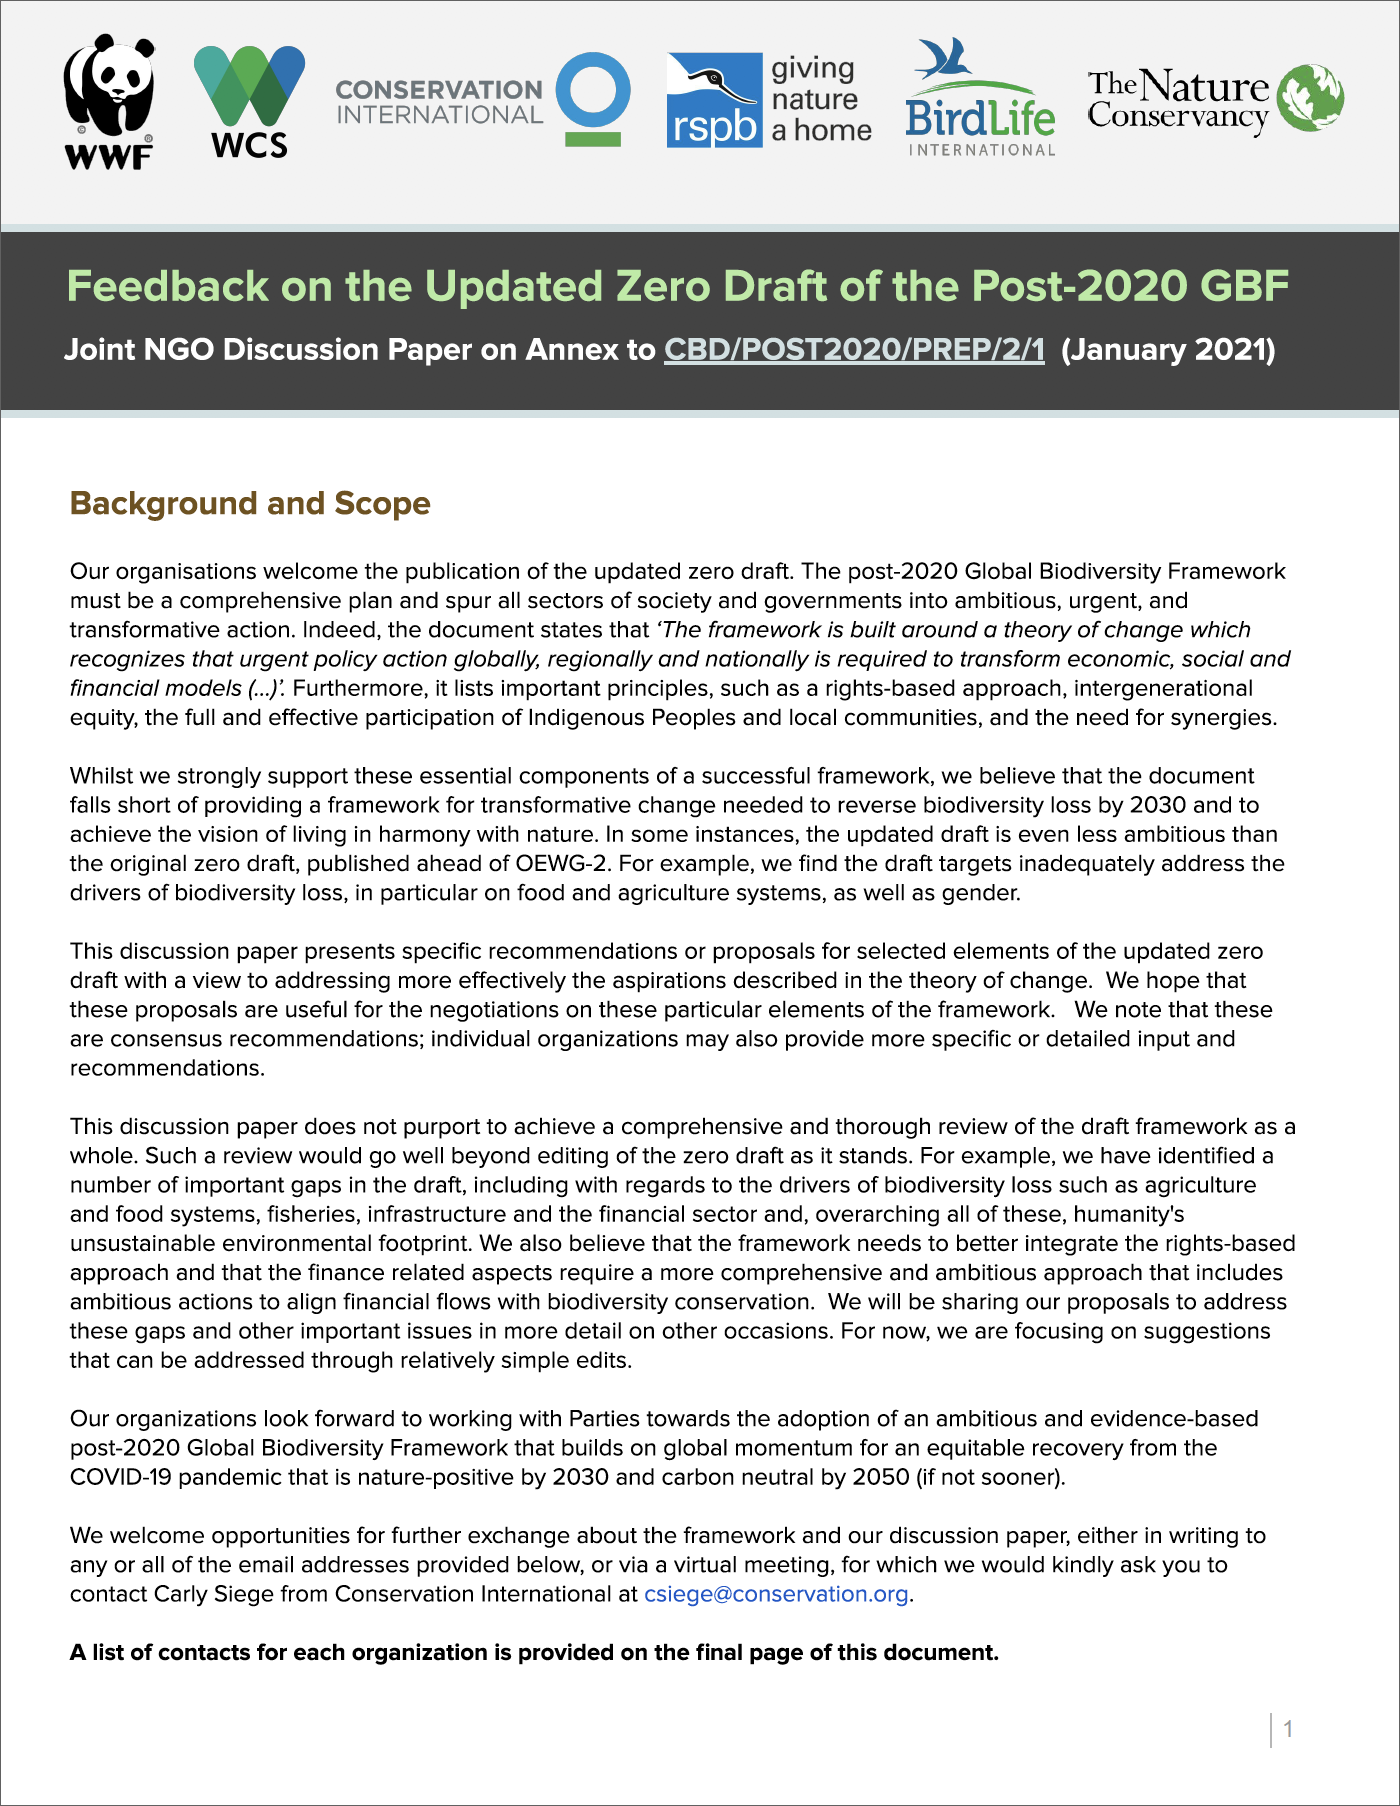 Feedback on the Updated Zero Draft of the Post-2020 GBF, January 2021